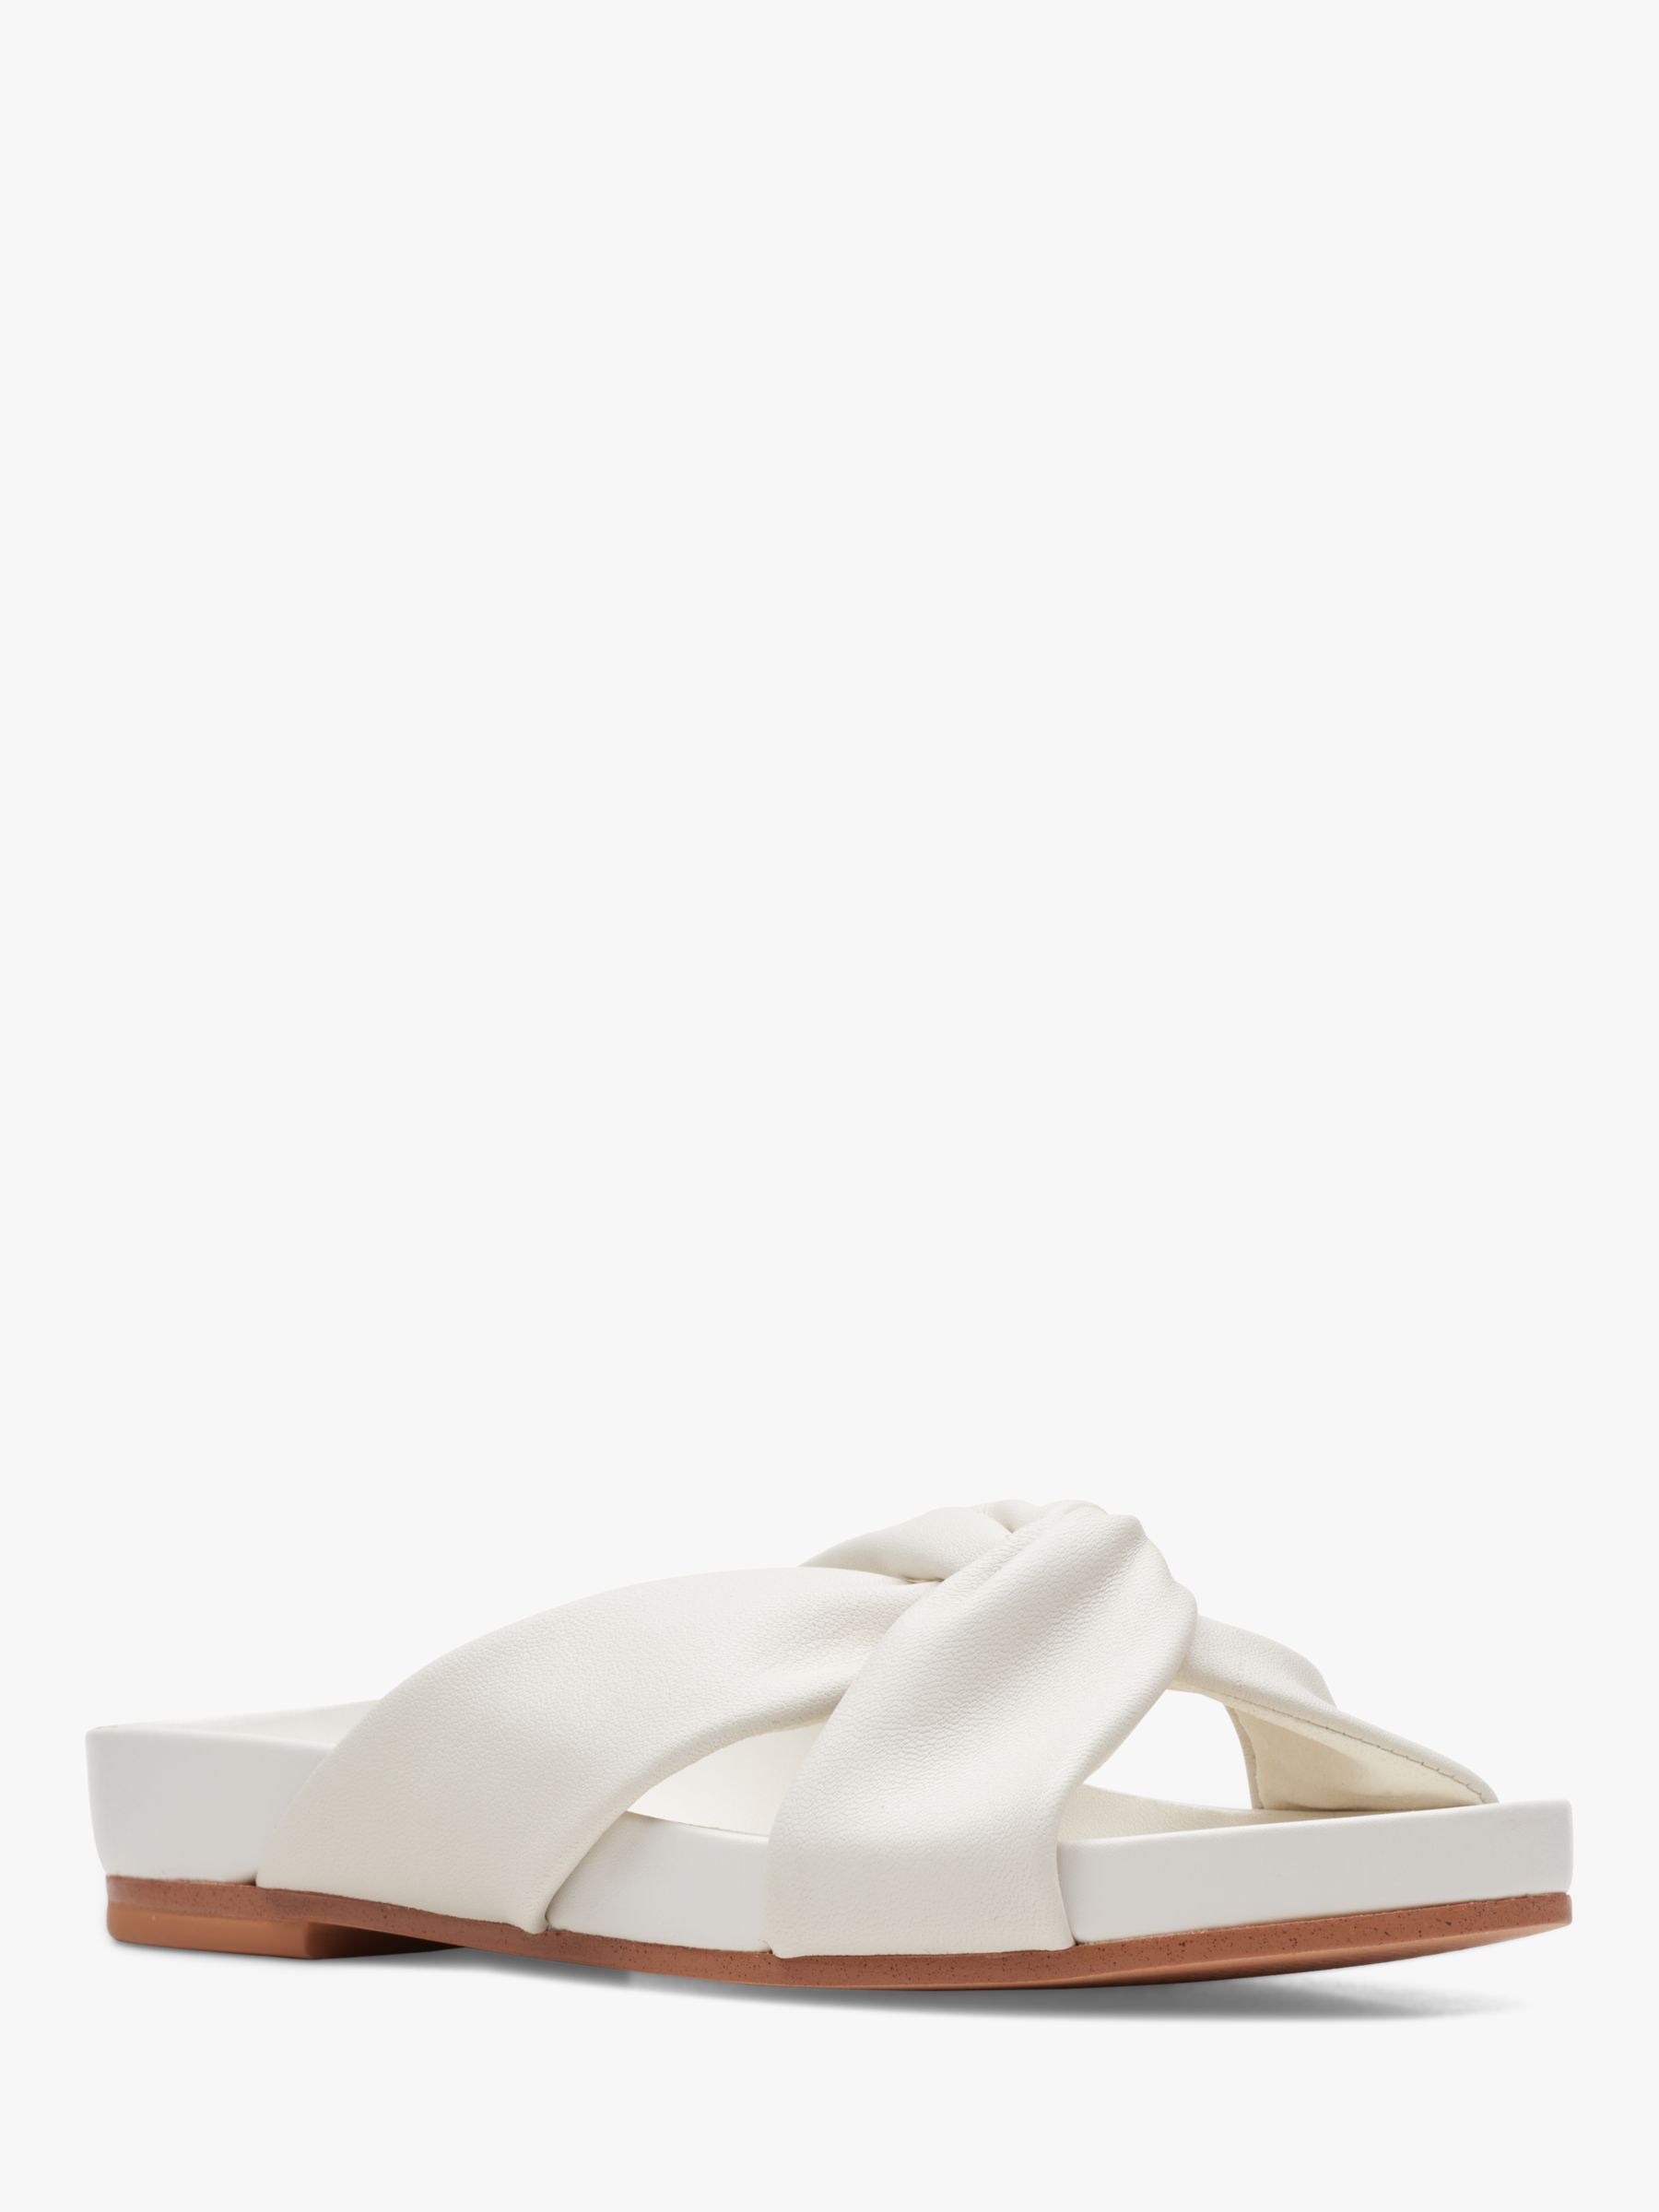 Clarks Pure Twist Leather Sandals, White at John Lewis & Partners